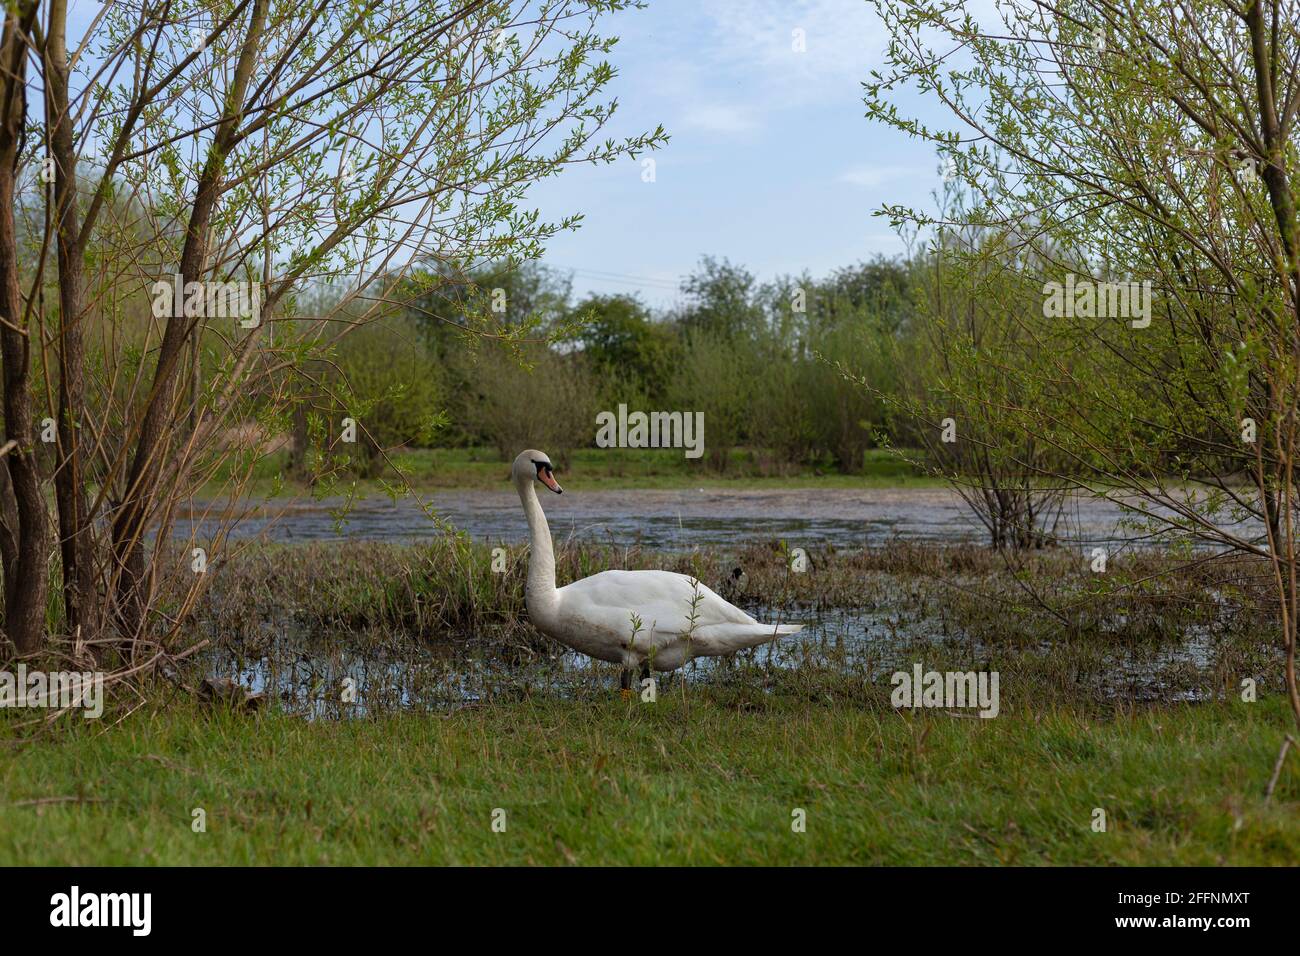 A Mute Swan in its natural wetland habitat in Britain.This image was taken beside the River Aire. Stock Photo